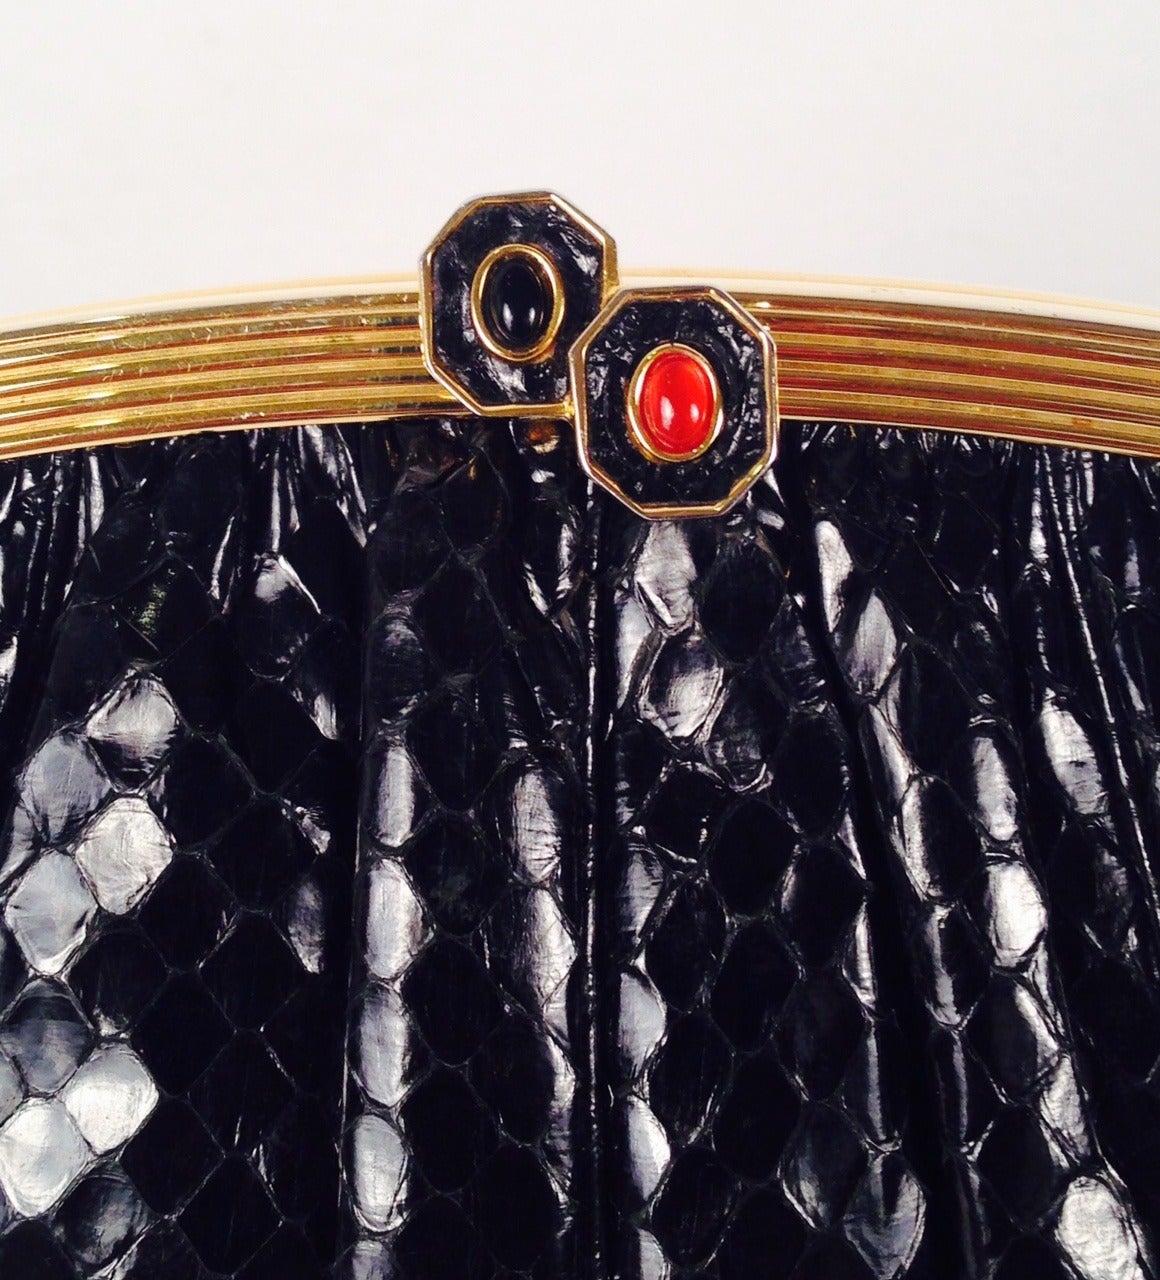 Vintage Judith Leiber Black Snakeskin Evening Bag With Jeweled Clasp In Excellent Condition For Sale In Palm Beach, FL